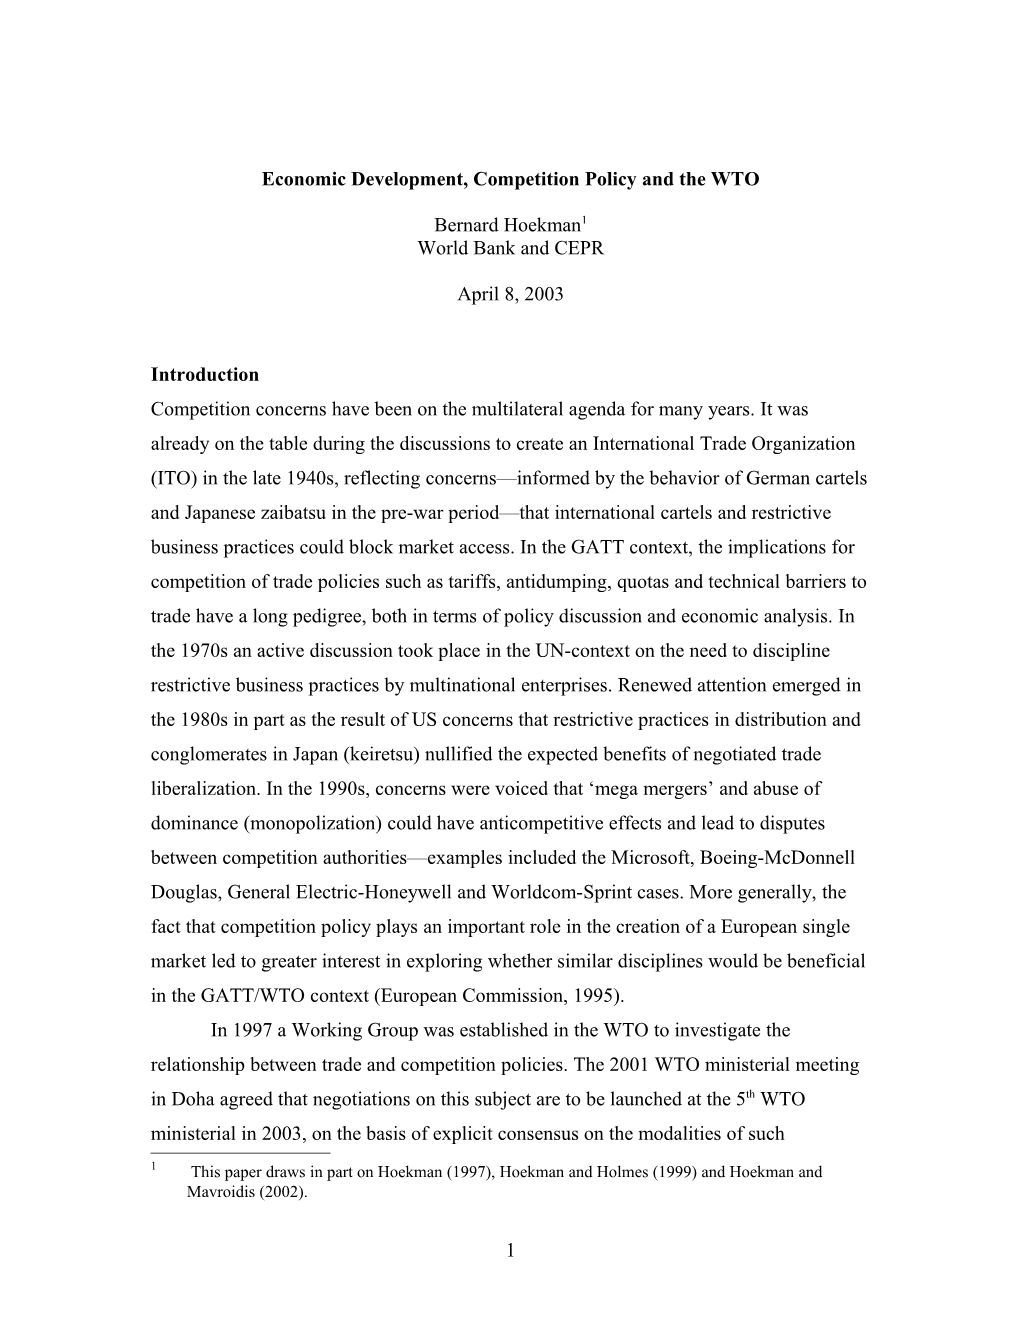 Competition Policy in the Context of Industrial and Trade Policy Reform*